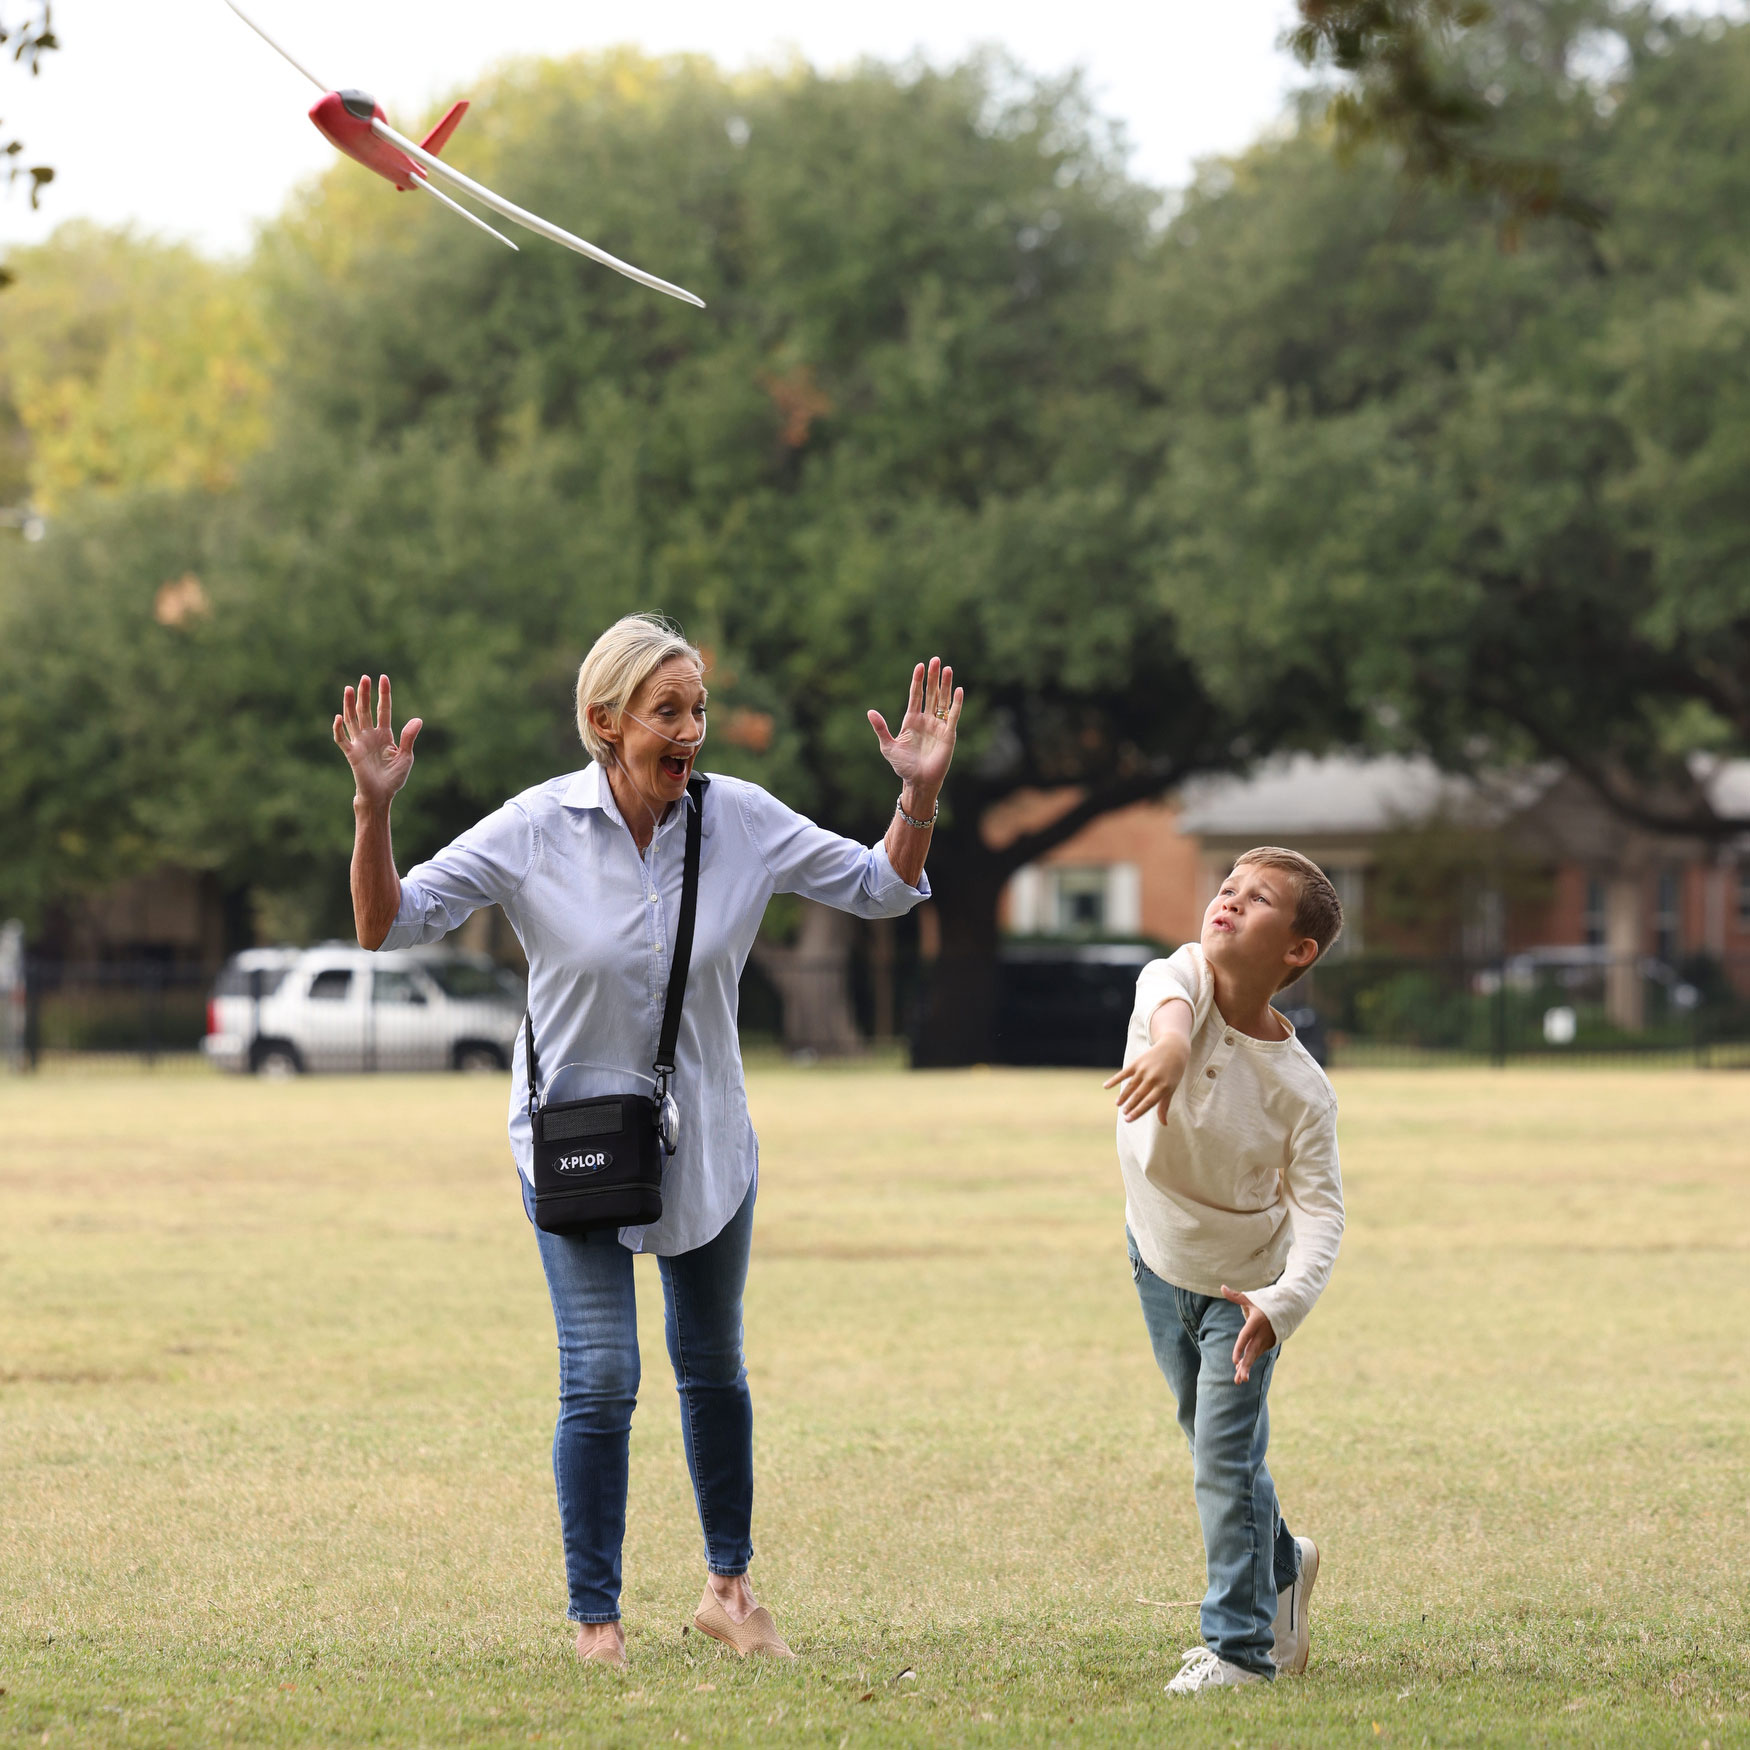 photograph of a woman using the X-PLOR portable oxygen concentrator, in a park setting, cloudy day, with young boy playing with a toy airplane